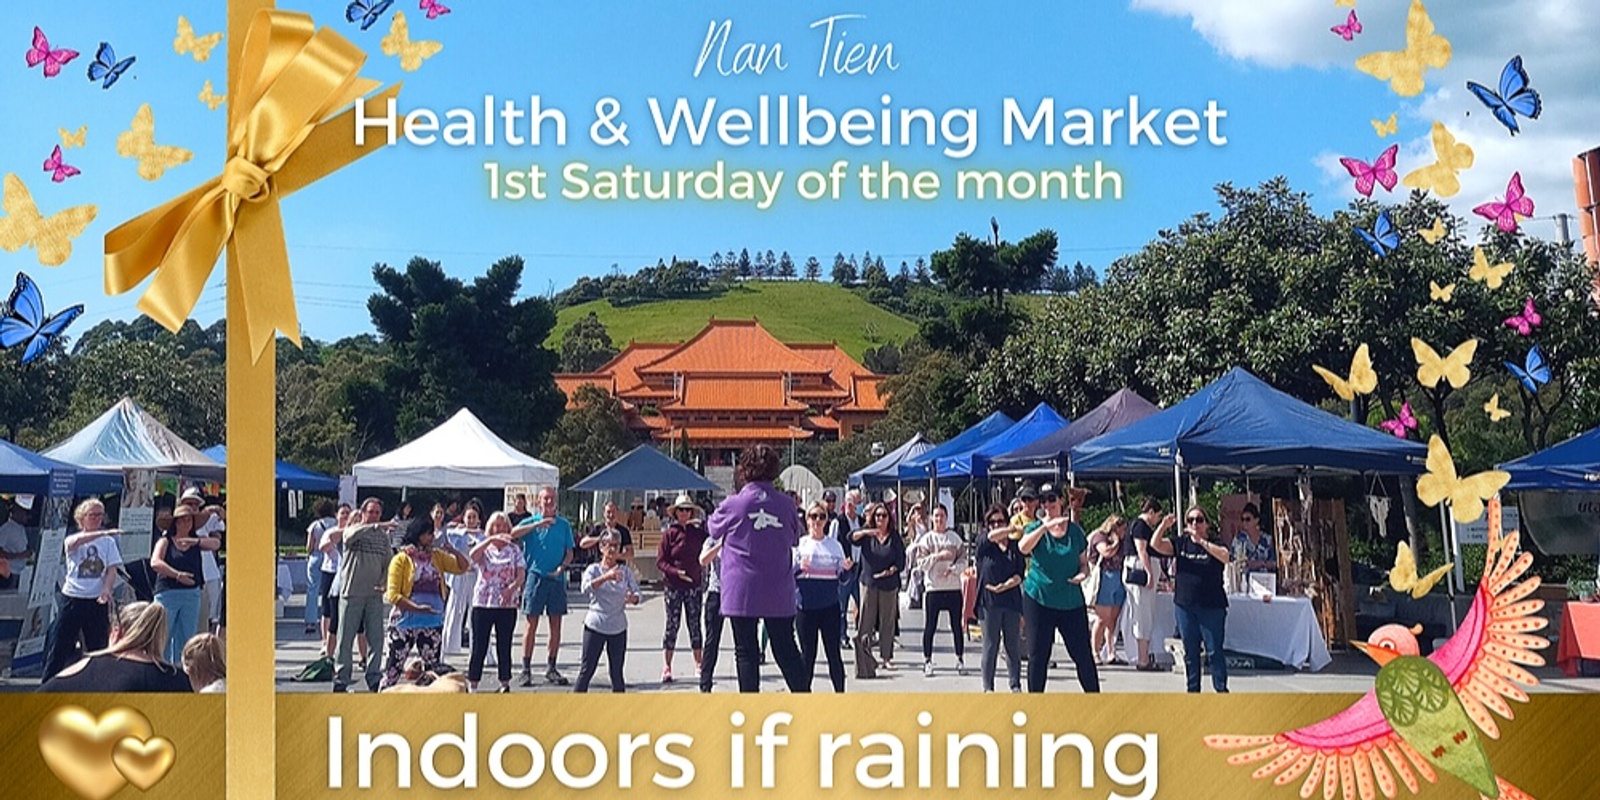 Banner image for Nan Tien Health and Wellbeing Market